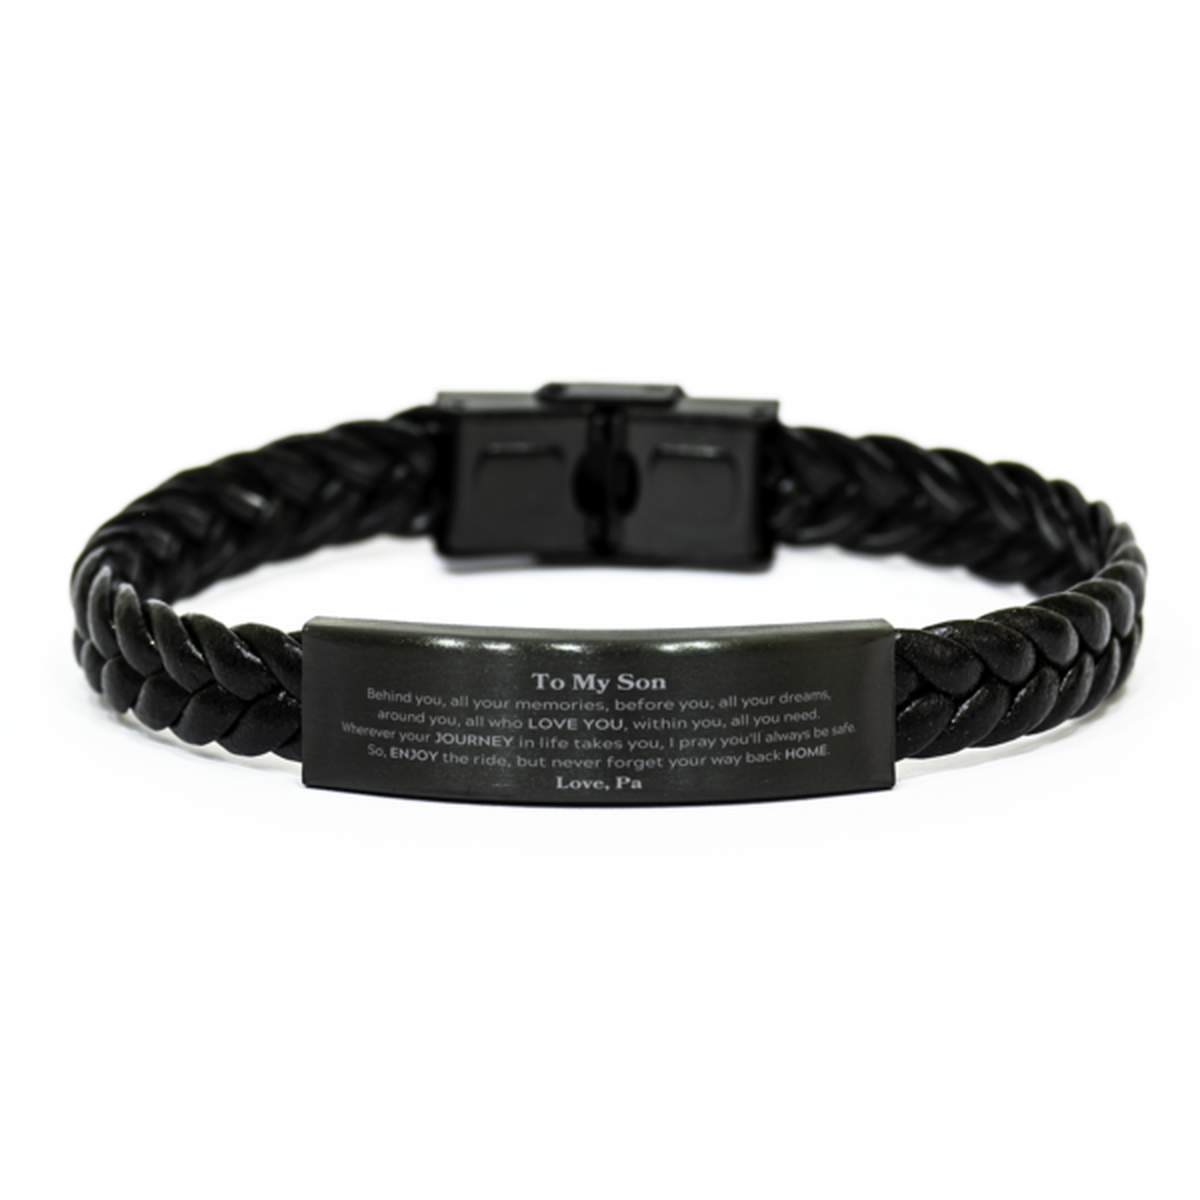 To My Son Graduation Gifts from Pa, Son Braided Leather Bracelet Christmas Birthday Gifts for Son Behind you, all your memories, before you, all your dreams. Love, Pa